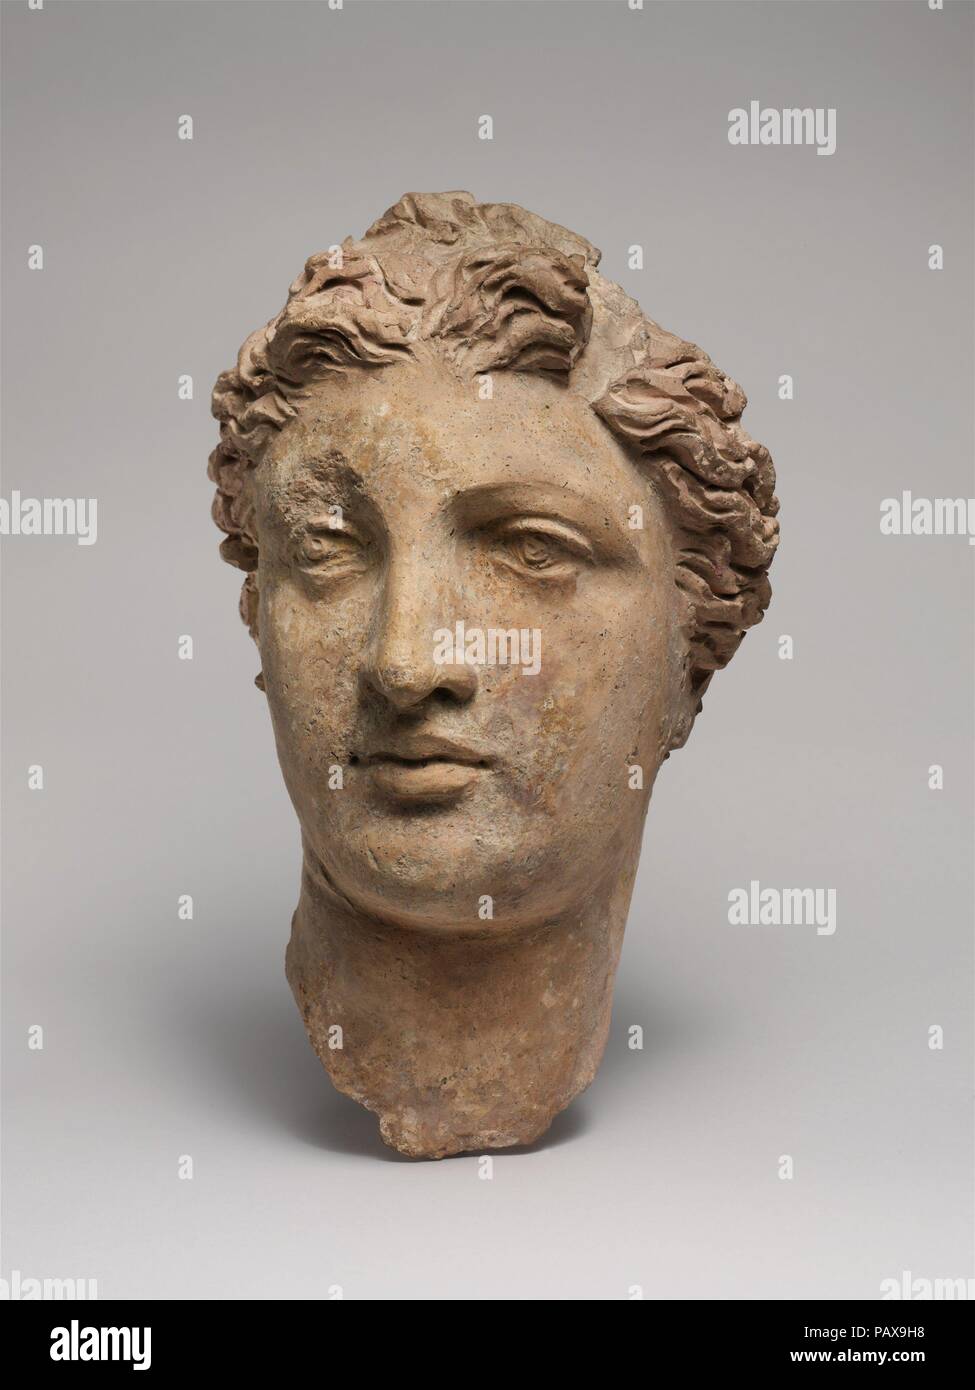 Terracotta head of a woman. Culture: Greek, South Italian, Tarentine. Dimensions: H. 10 1/2 in. (26.7 cm). Date: 3rd-2nd century B.C..  Since fine, hard stone such as marble was not readily available, Tarentine artists used terracotta for large-scale figures of high quality. The work to which this extraordinary head originally belonged may have been associated with a goddess, perhaps Aphrodite. Among the thousands of clay vases and figures found at Tarentum, subjects pertaining to the life of women, and specifically marriage, are prevalent. Museum: Metropolitan Museum of Art, New York, USA. Stock Photo